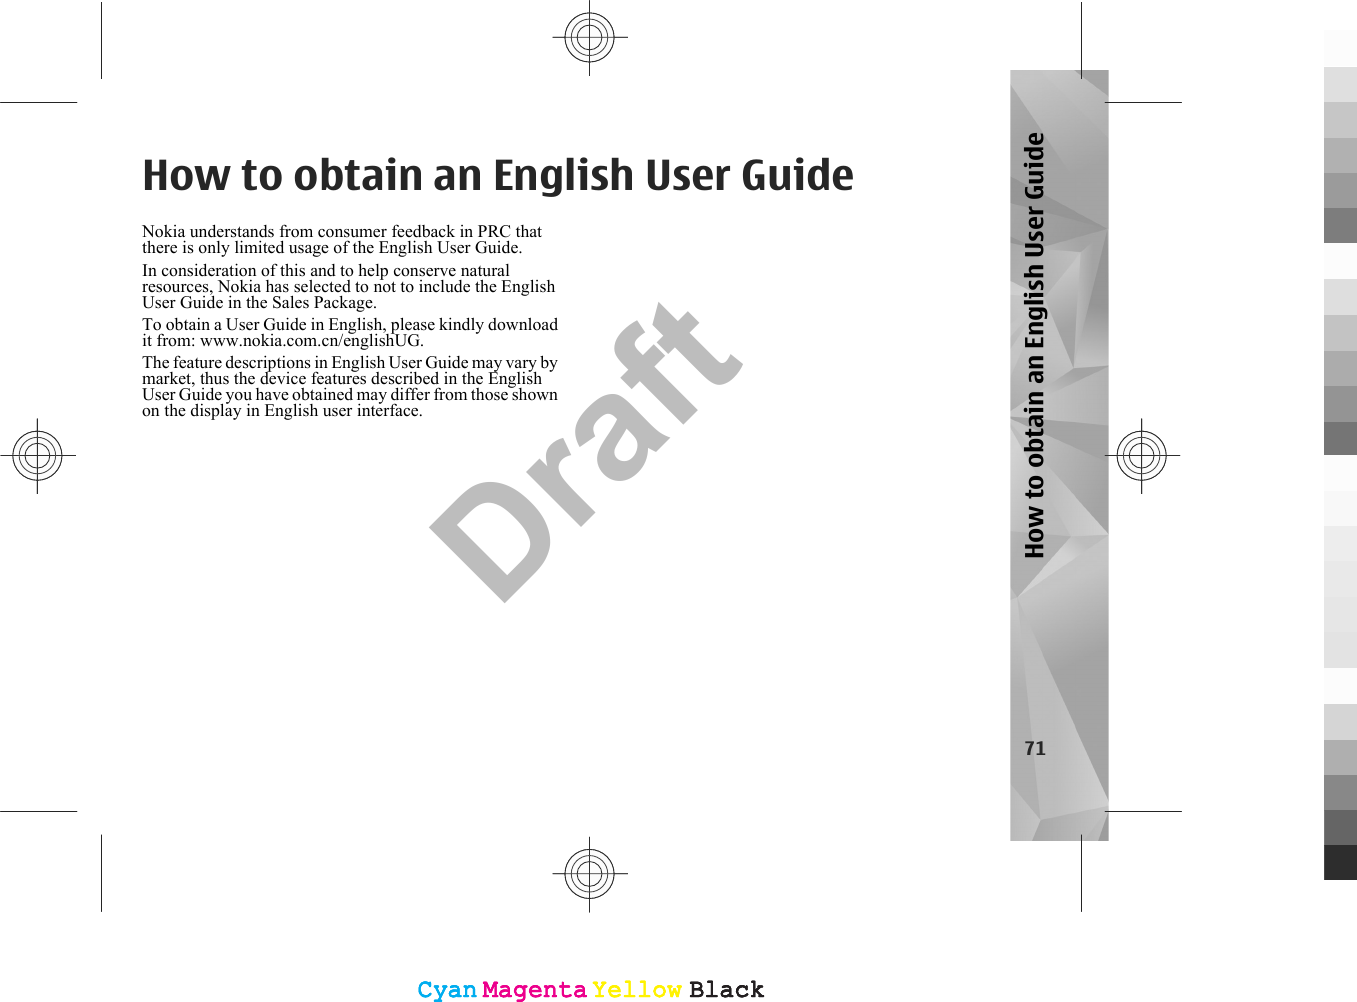 How to obtain an English User GuideNokia understands from consumer feedback in PRC thatthere is only limited usage of the English User Guide.In consideration of this and to help conserve naturalresources, Nokia has selected to not to include the EnglishUser Guide in the Sales Package.To obtain a User Guide in English, please kindly downloadit from: www.nokia.com.cn/englishUG.The feature descriptions in English User Guide may vary bymarket, thus the device features described in the EnglishUser Guide you have obtained may differ from those shownon the display in English user interface.71How to obtain an English User GuideCyanCyanMagentaMagentaYellowYellowBlackBlackCyanCyanMagentaMagentaYellowYellowBlackBlackDraft